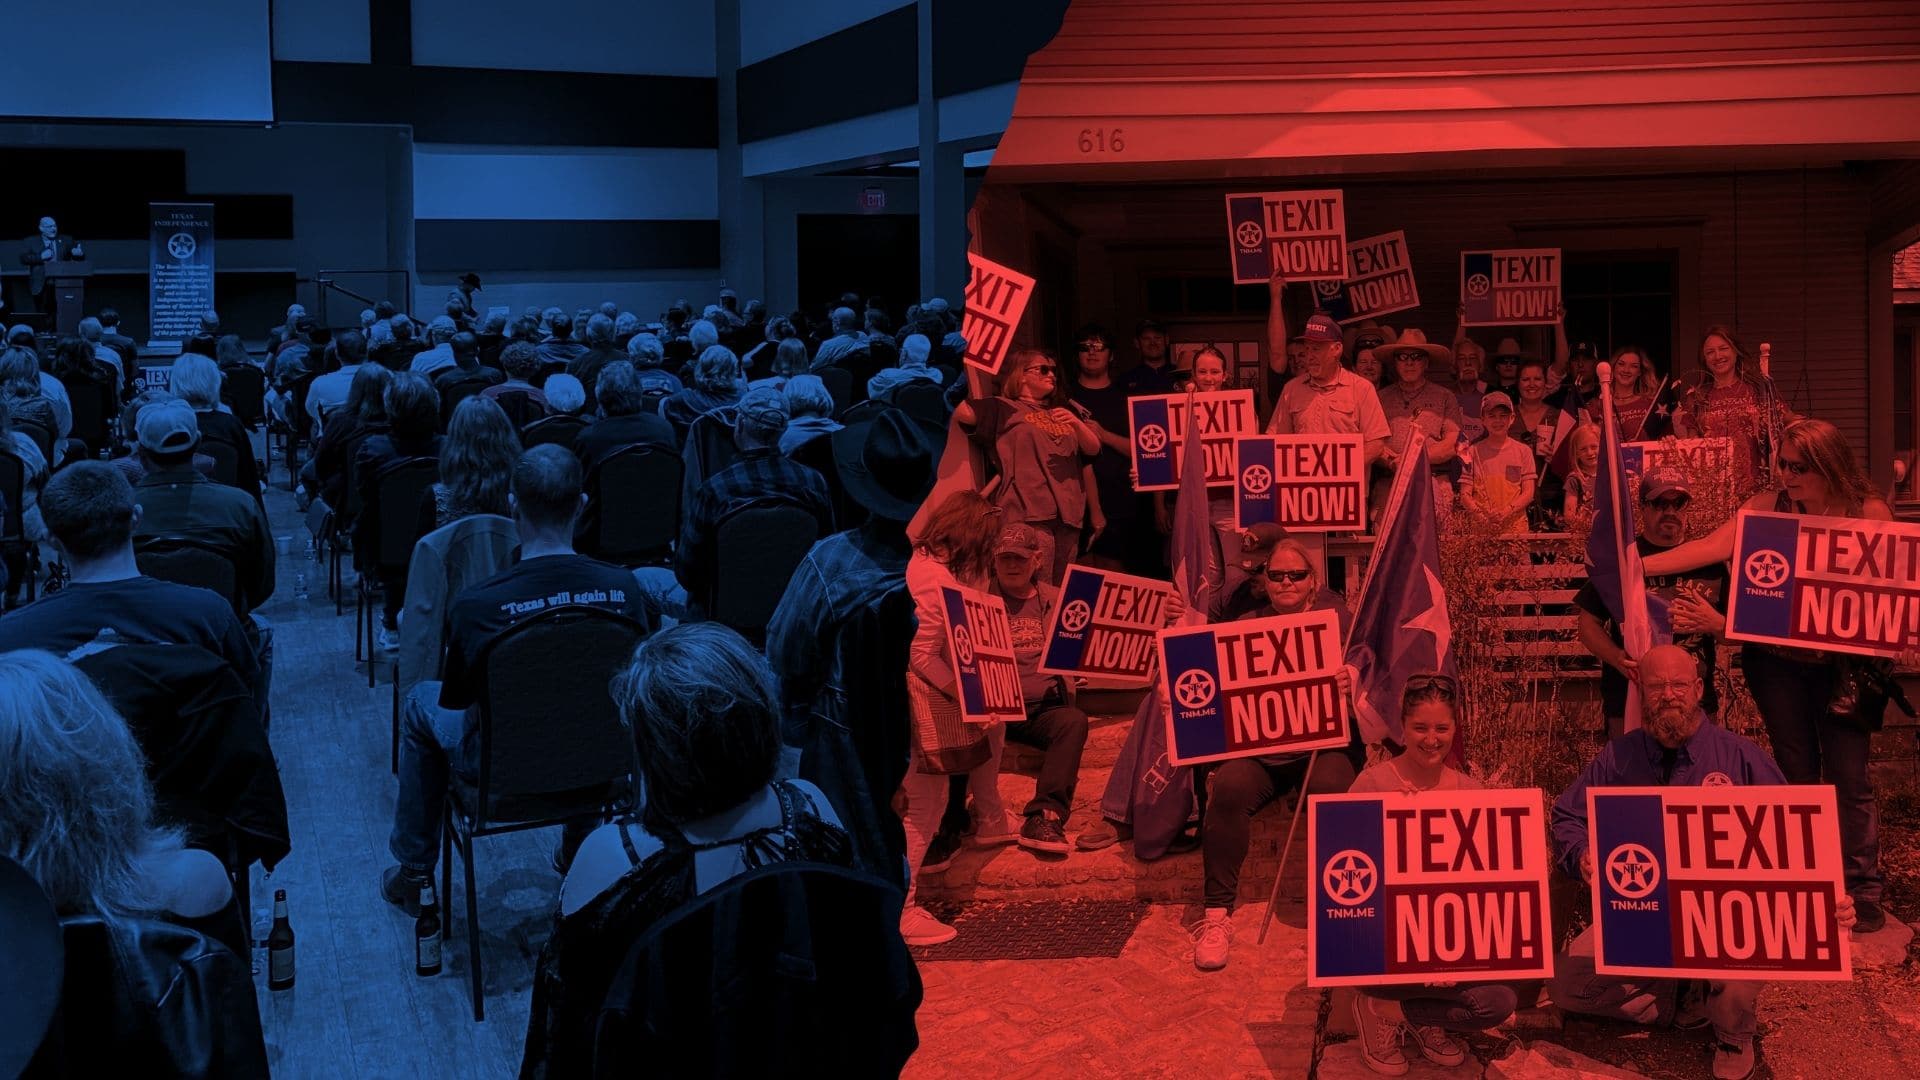 Using Smartphone Video For TEXIT Advocacy